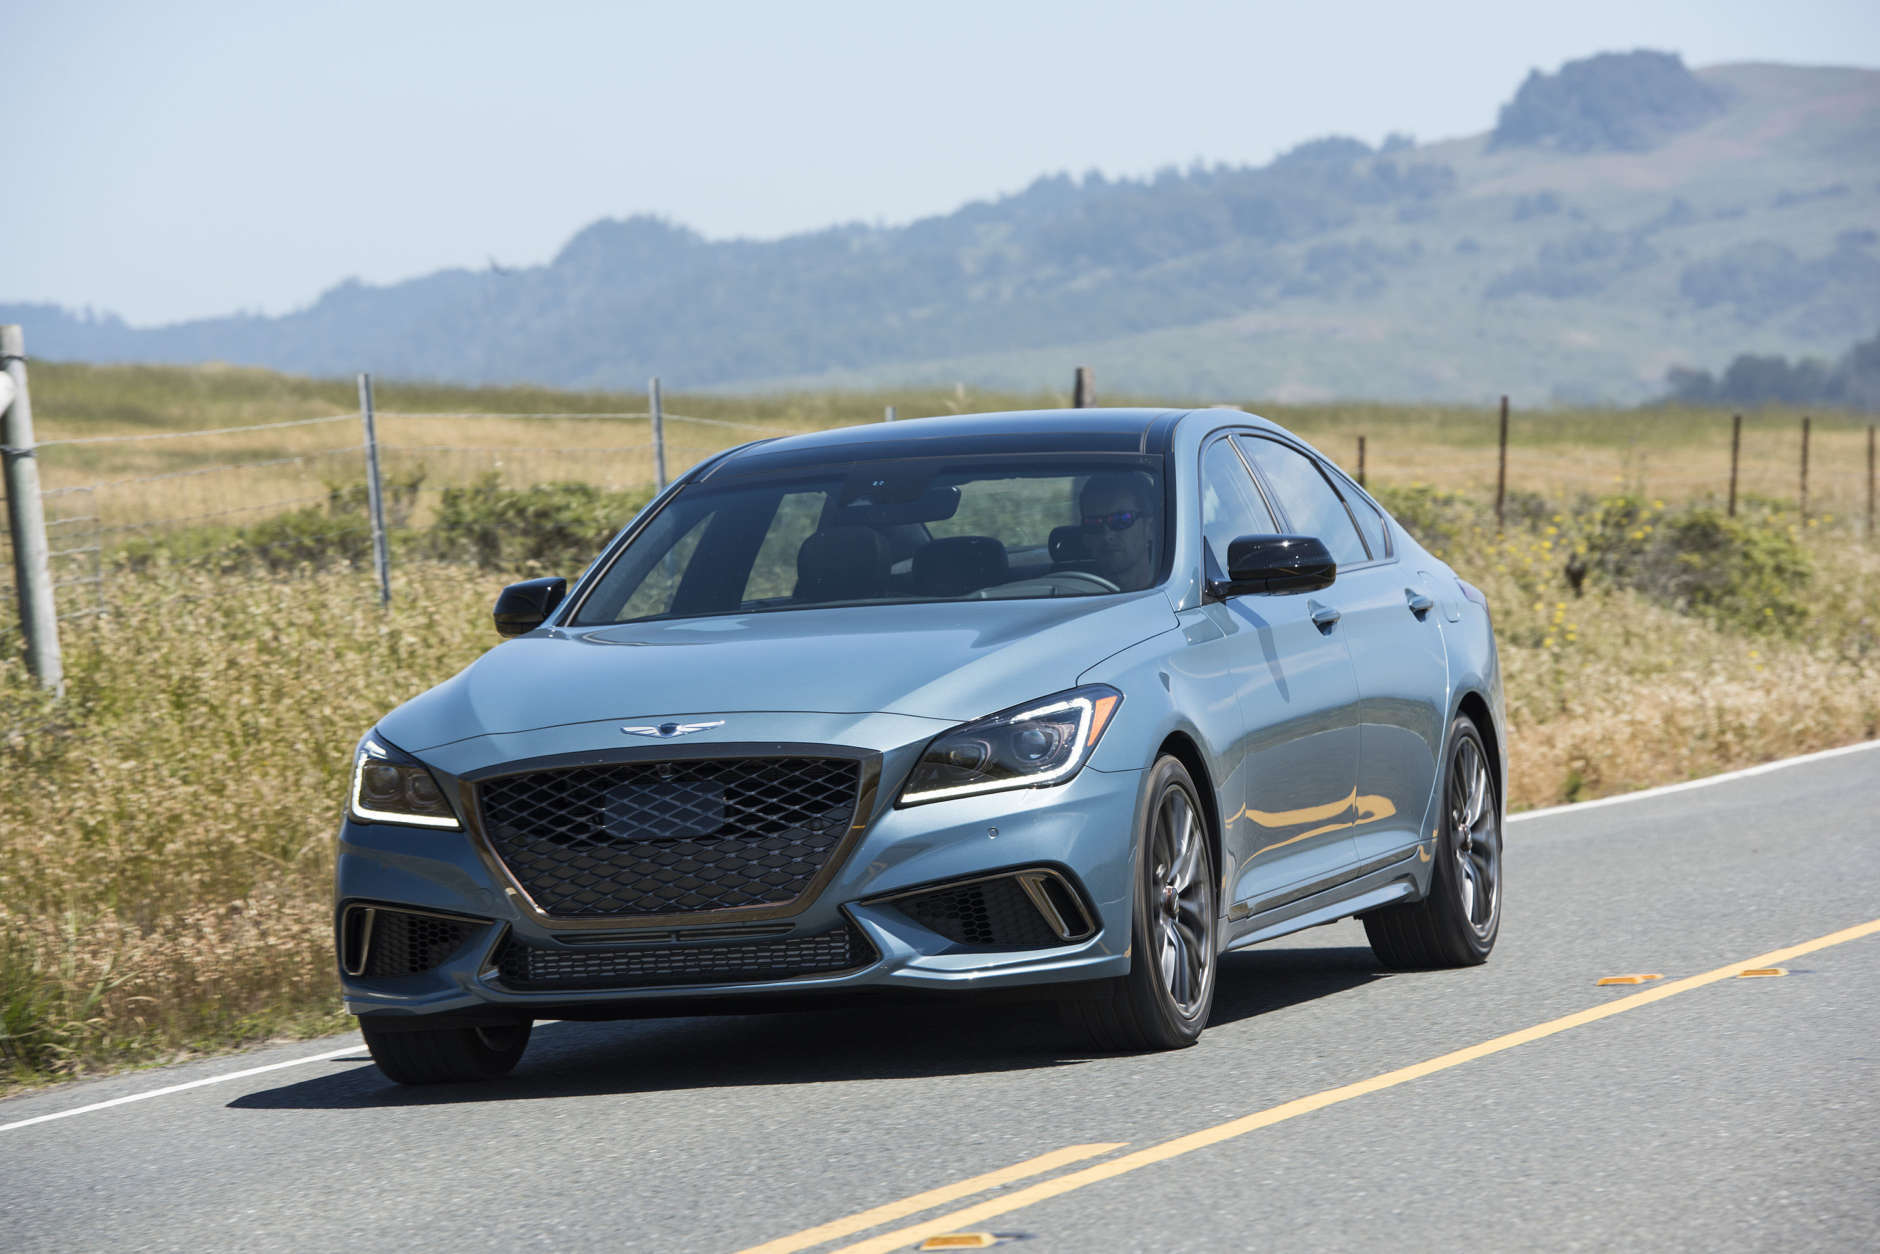 In the large luxury cars class, the Genesis G80 nabbed a Top Safety Pick+ award. (Courtesy Genesis)